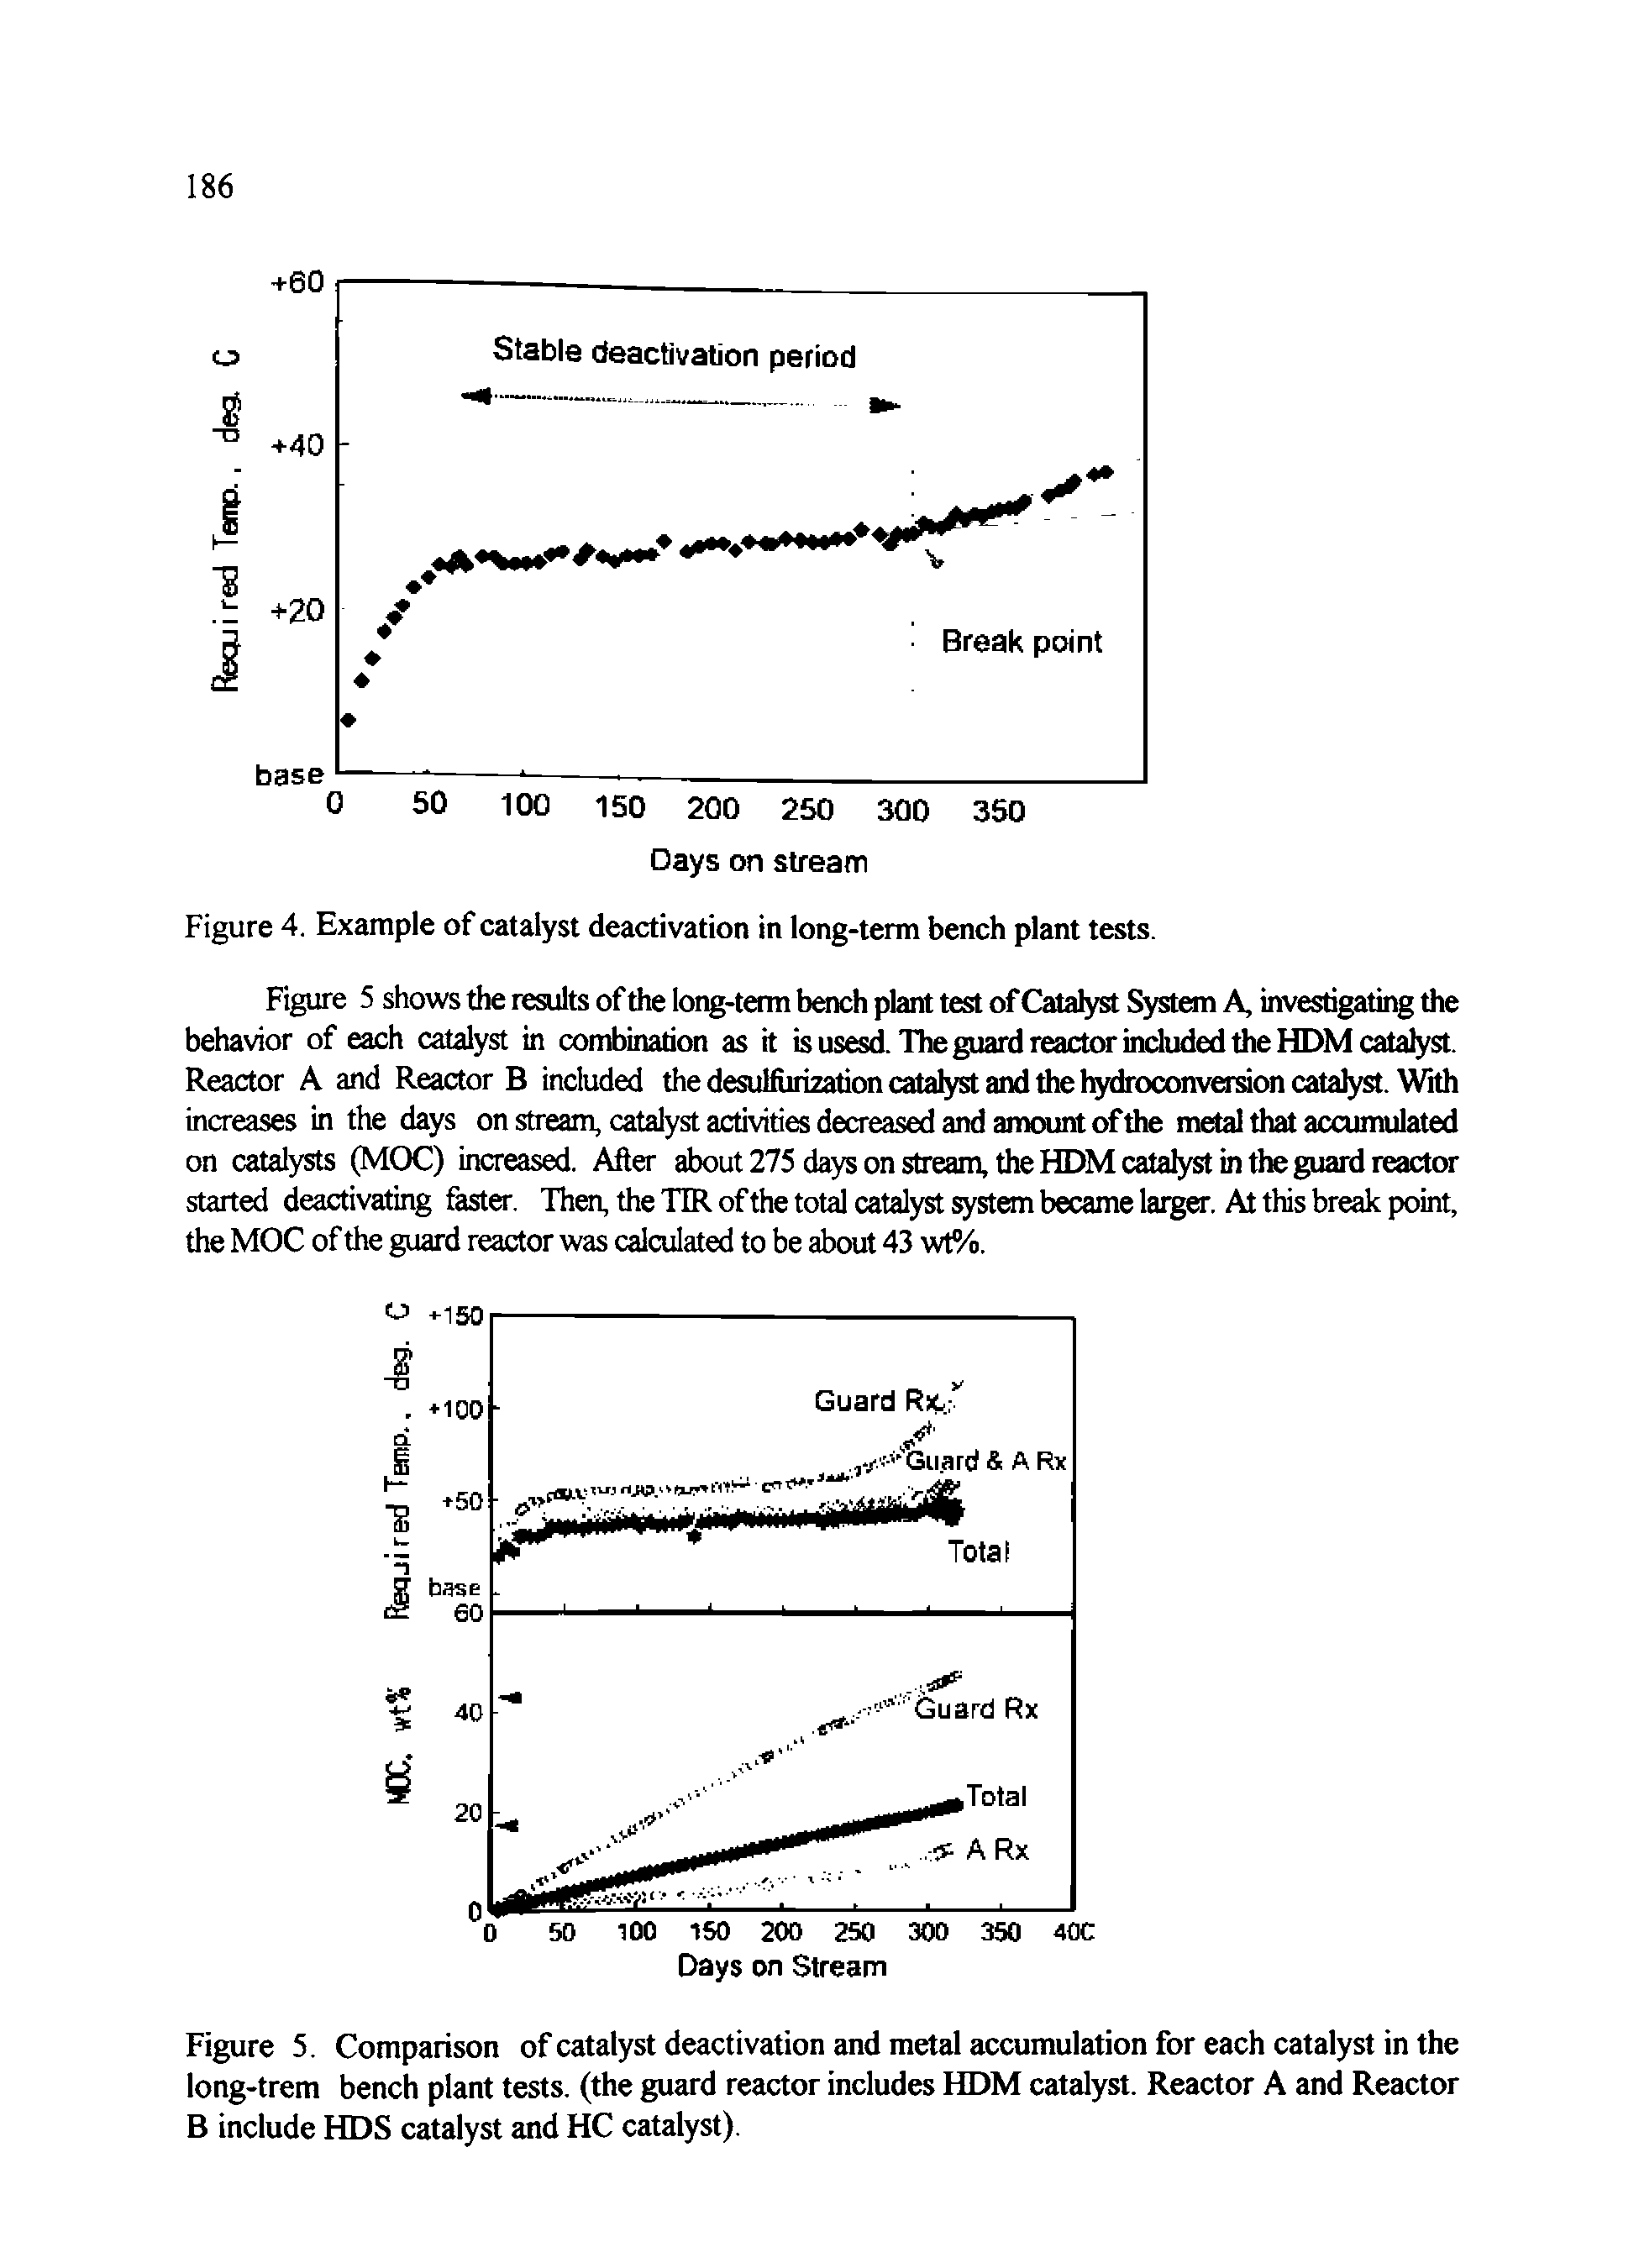 Figure 4. Example of catalyst deactivation in long-term bench plant tests.